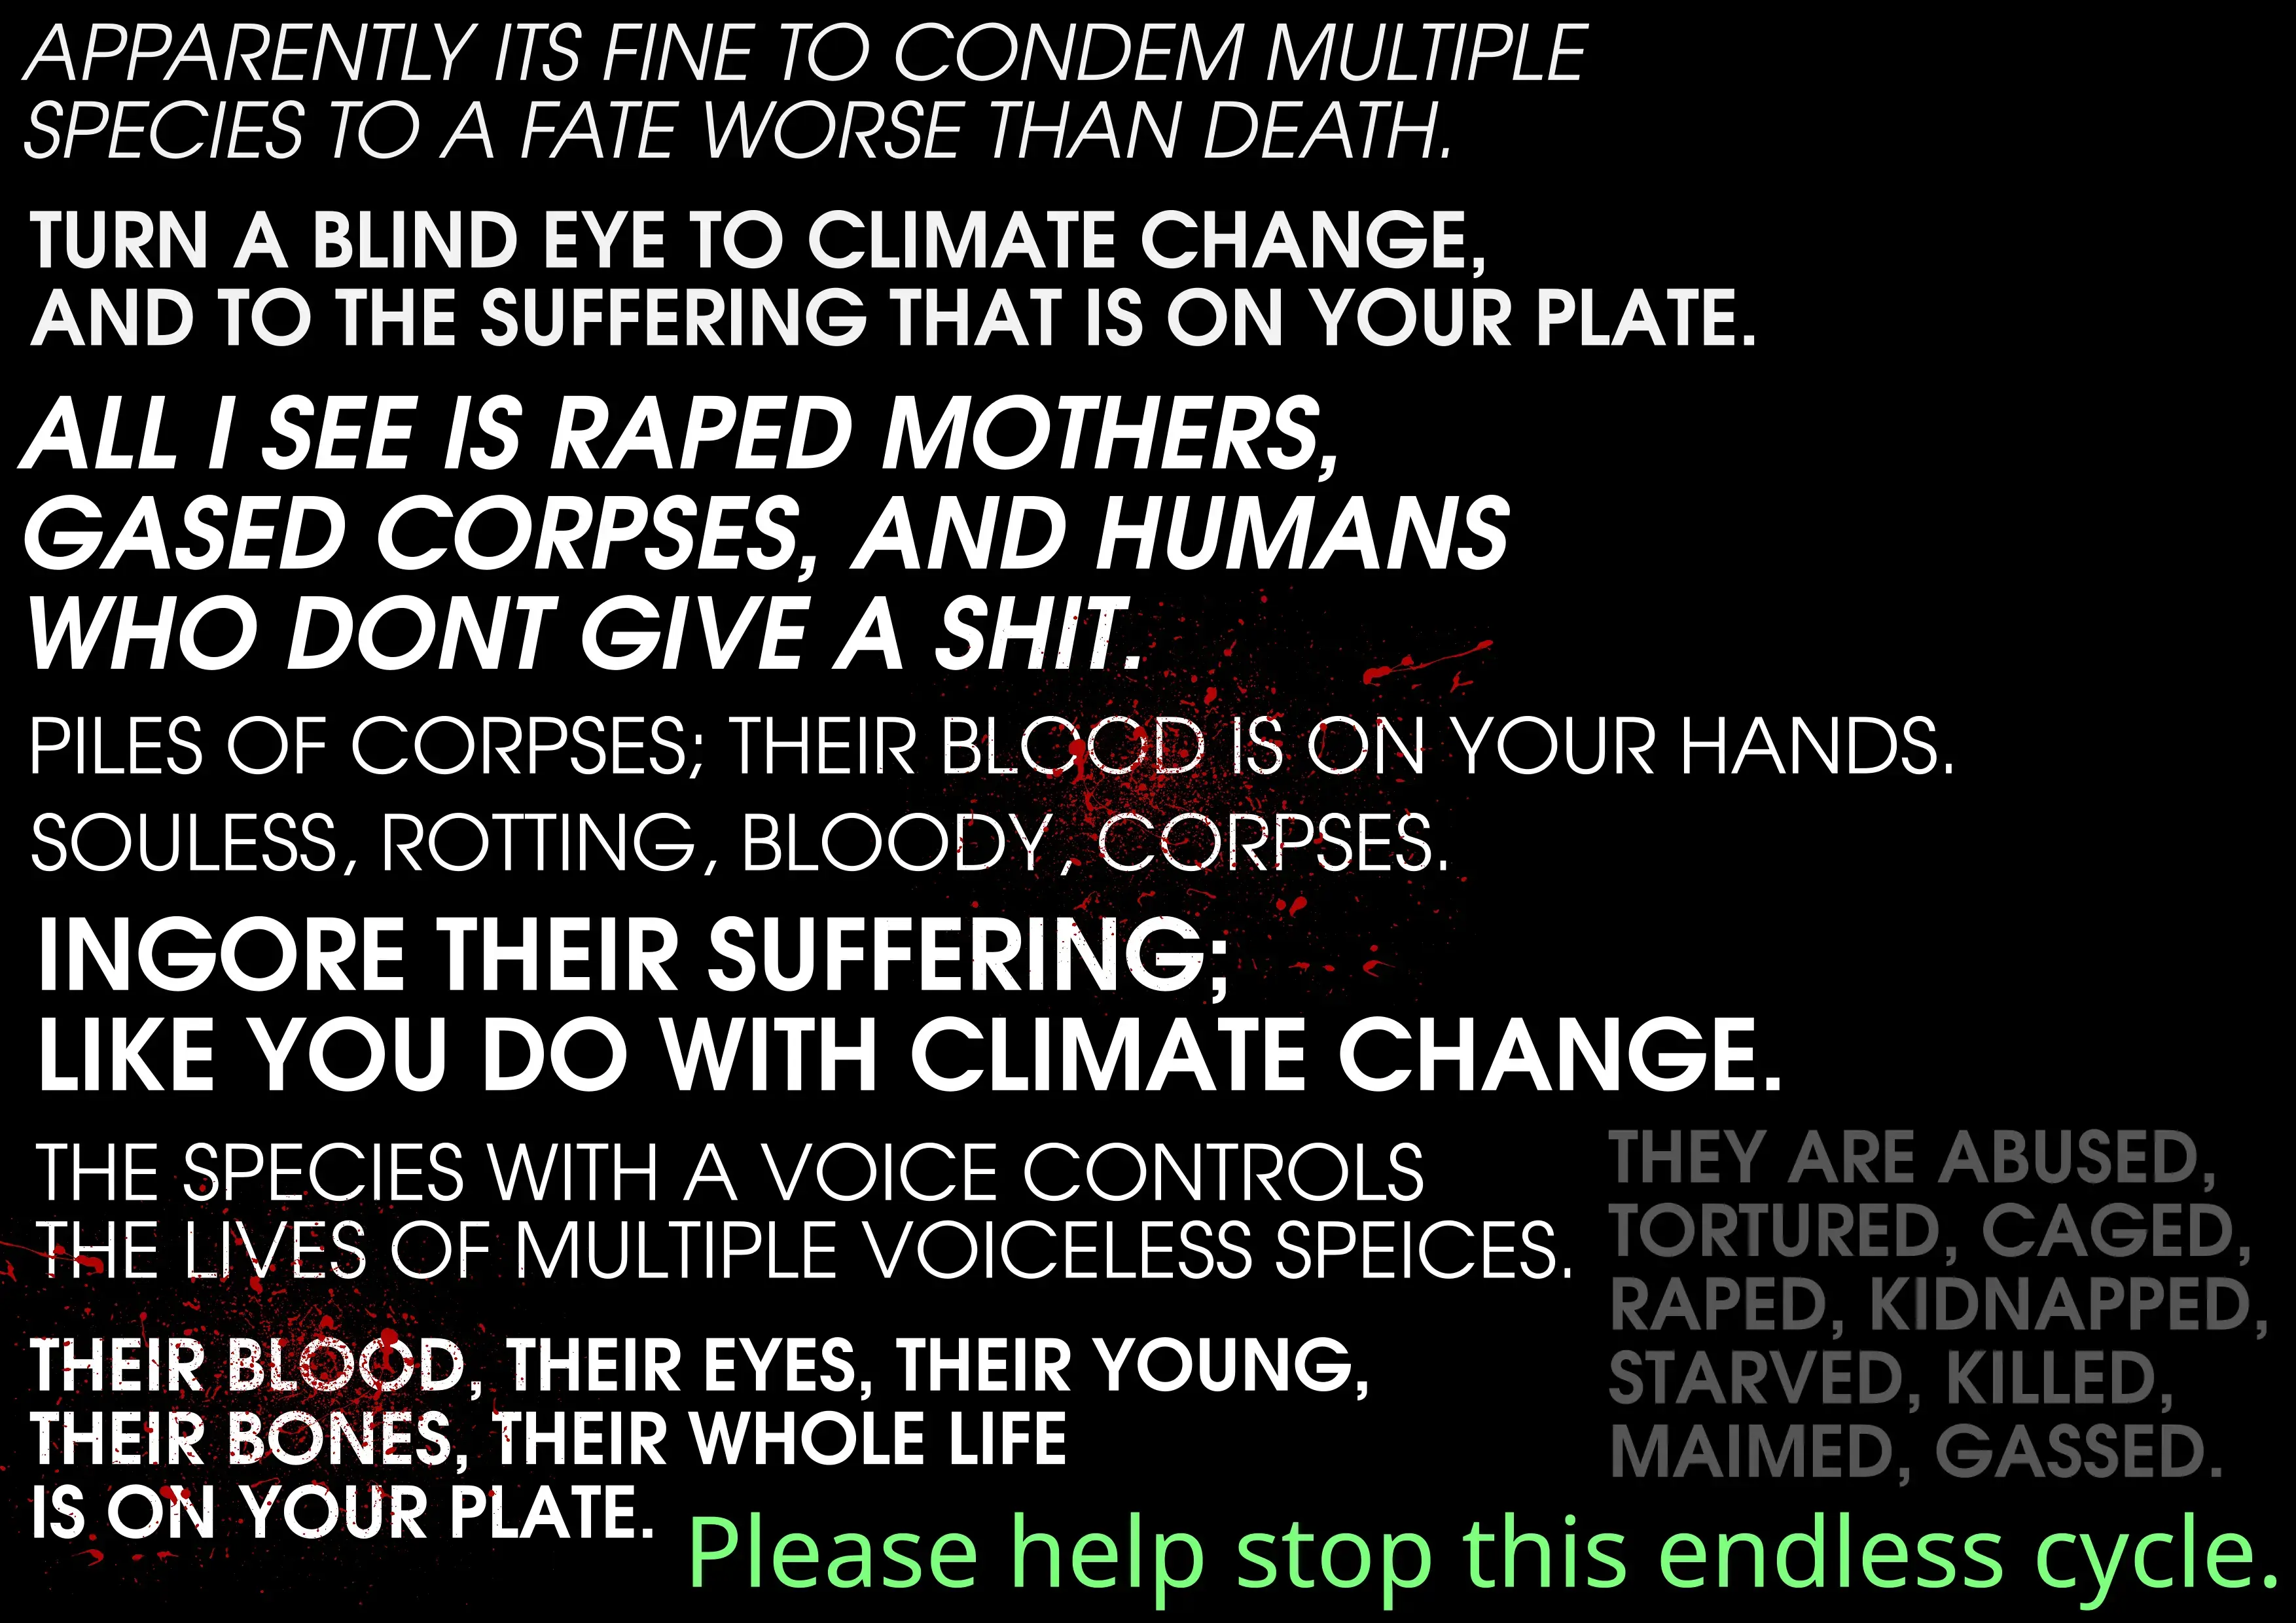 Apparently its fine to condem multiple species to a fate worse than death turn a blind eye to climate change and to the suffering that is on your plate. All i see is raped mothers, gassed corpses, and humans who don't give a shit piles of corpses; their blood is on your hands.  souless, rotting, bloody, corpses. Ingore their suffering like you do with climate change the species with a voice controls the lives of multiple voiceless species their blood, their eyes, their young, their bones, their whole life is on your plate.  they are abused tortured caged raped kidnapped starved killed maimed, gassed  Please help stop this endless cycle.